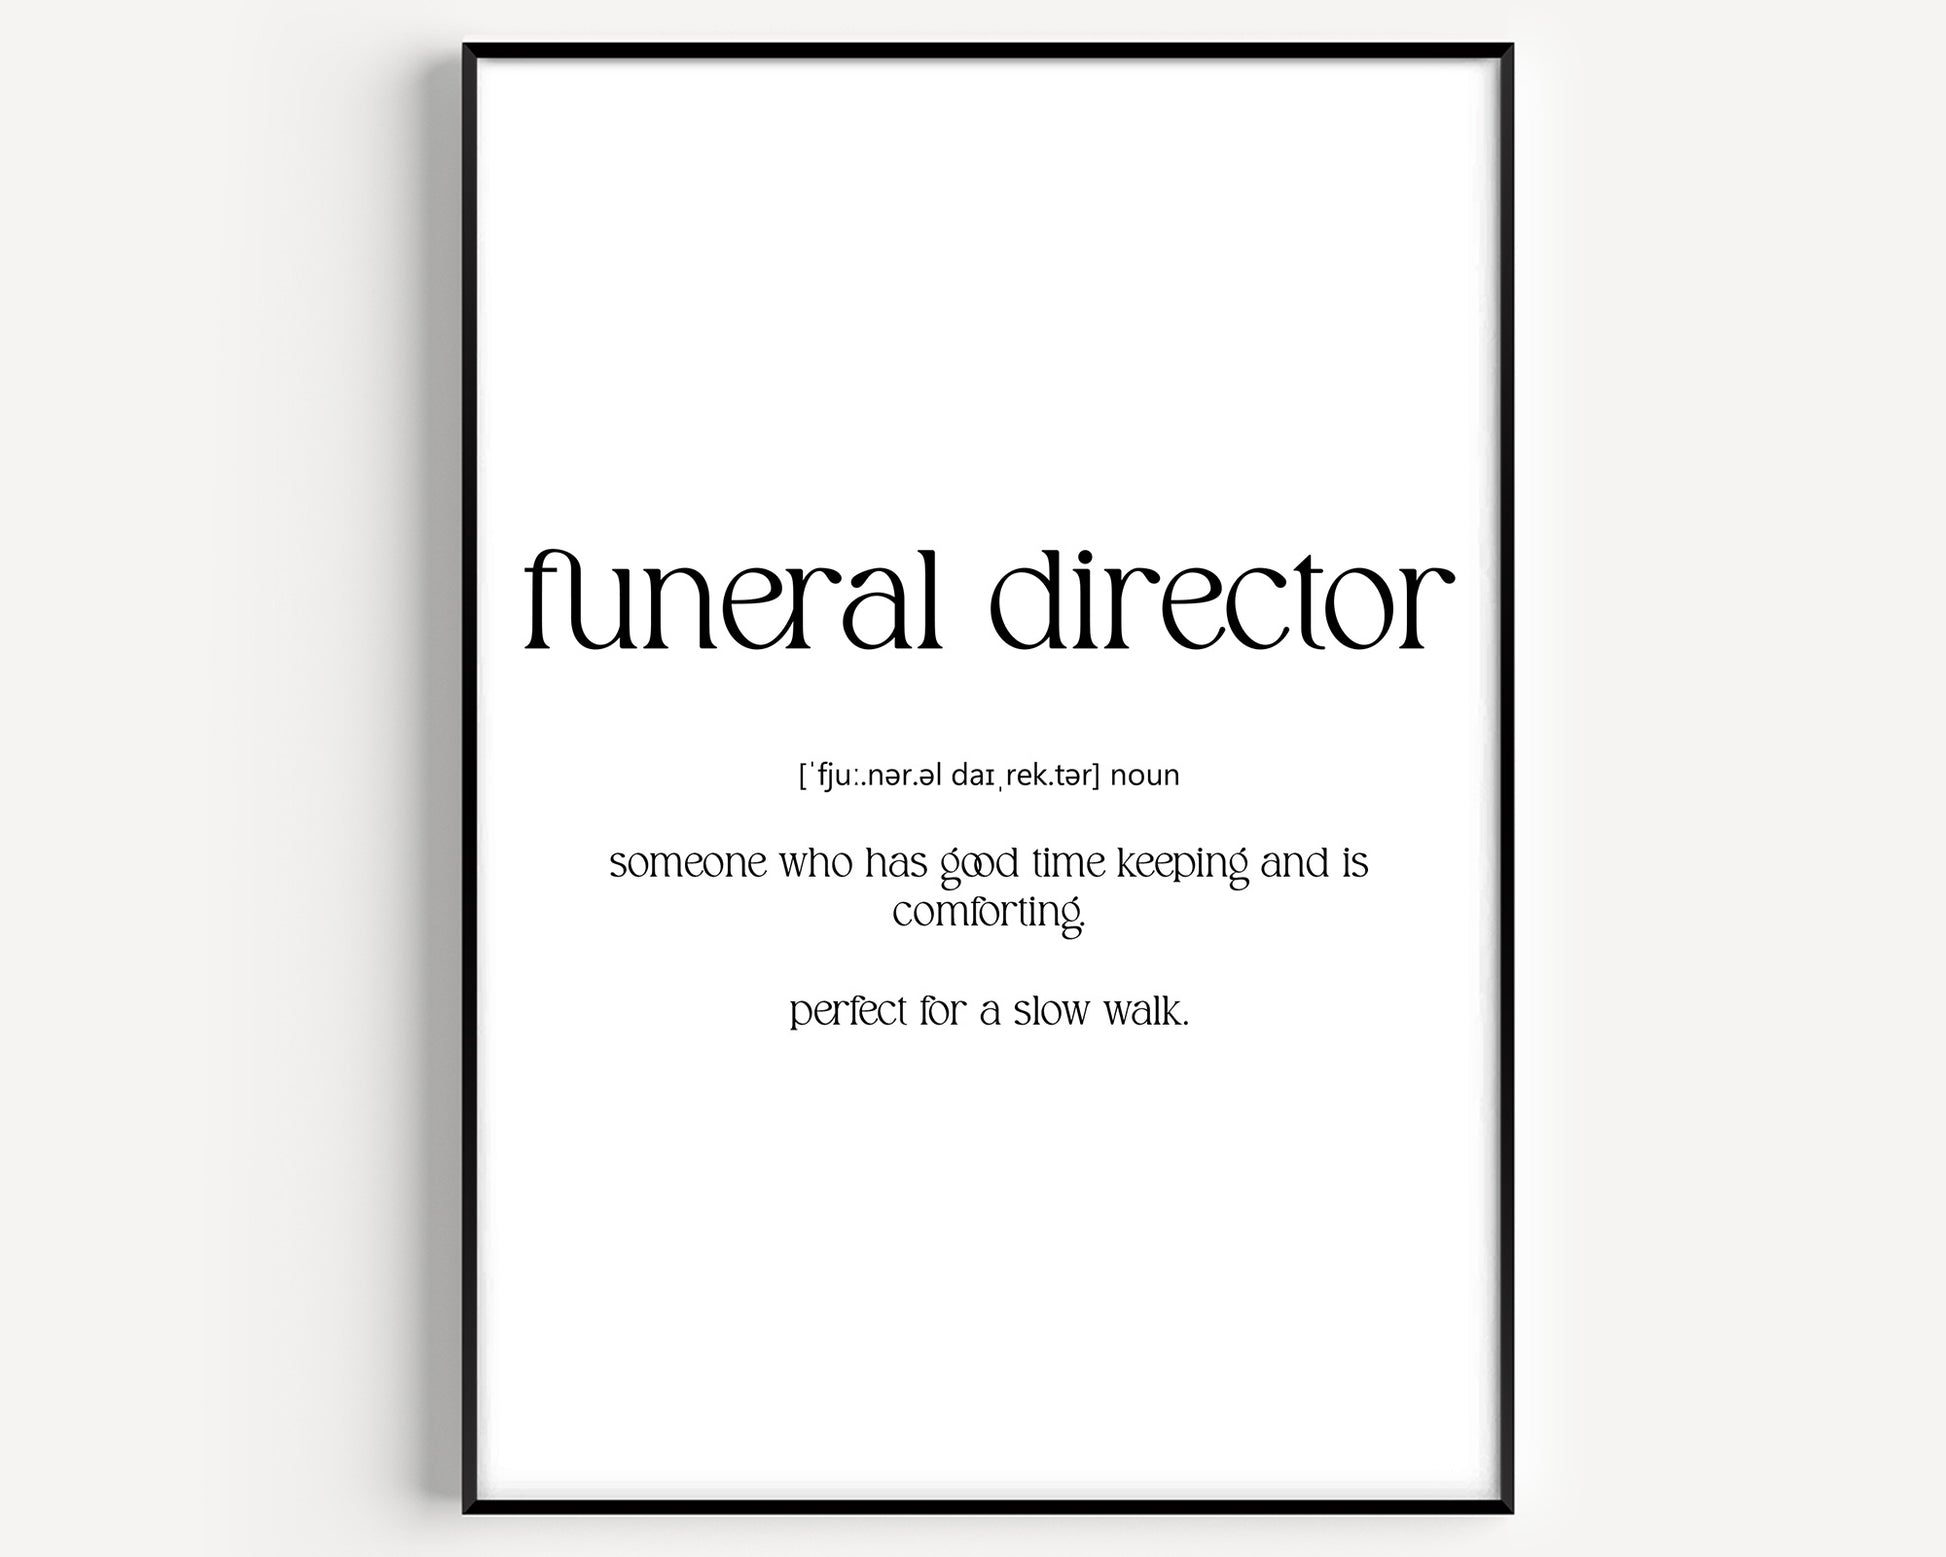 Funeral Director Definition Print - Magic Posters